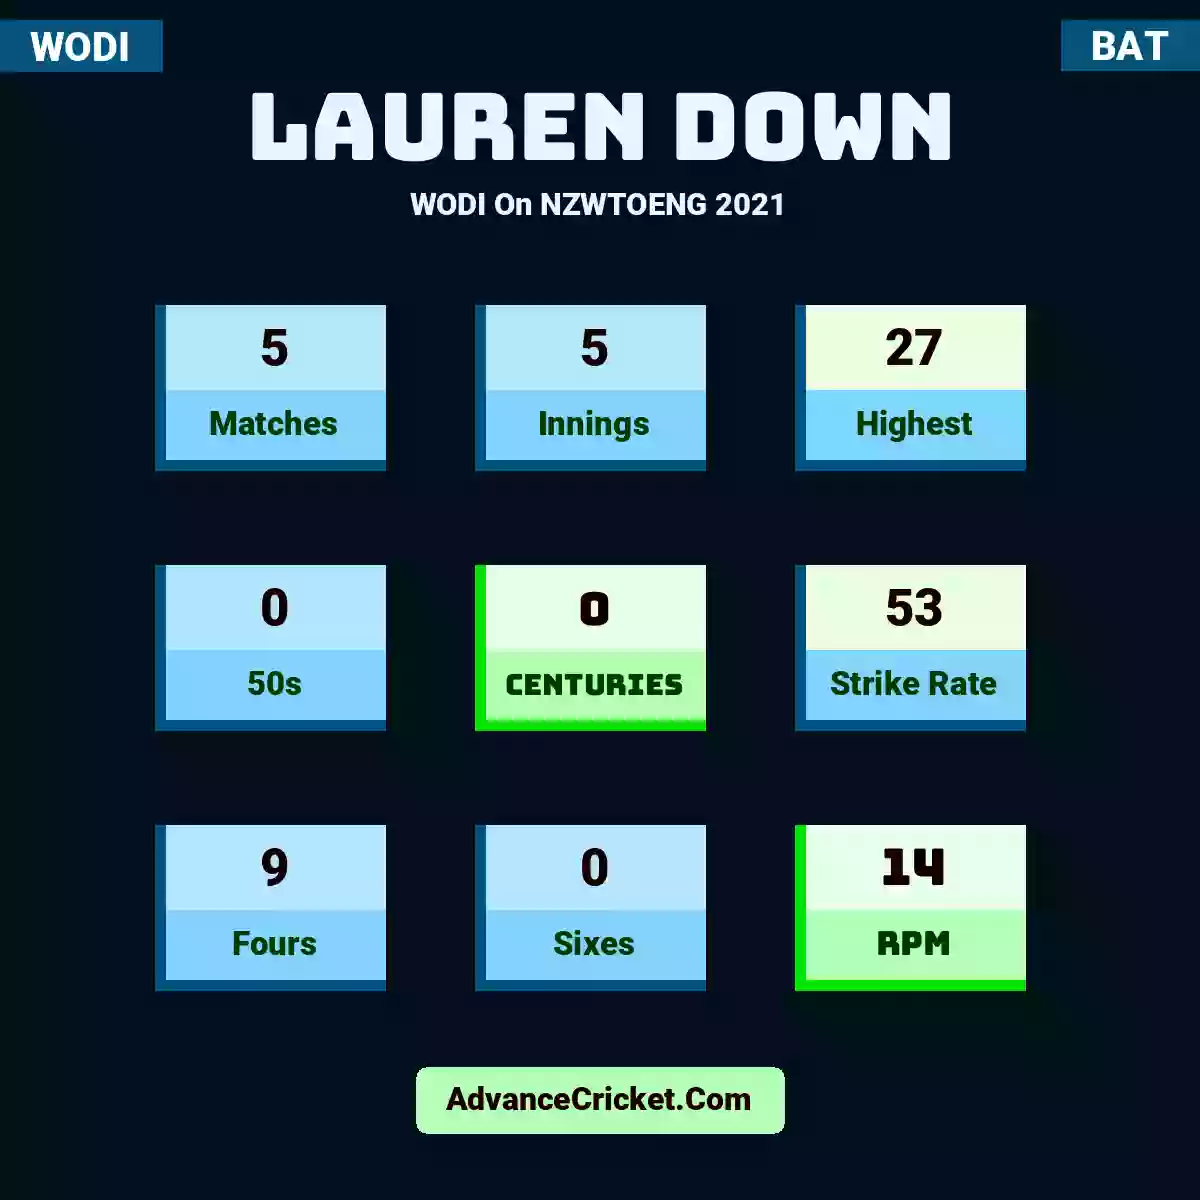 Lauren Down WODI  On NZWTOENG 2021, Lauren Down played 5 matches, scored 27 runs as highest, 0 half-centuries, and 0 centuries, with a strike rate of 53. L.Down hit 9 fours and 0 sixes, with an RPM of 14.